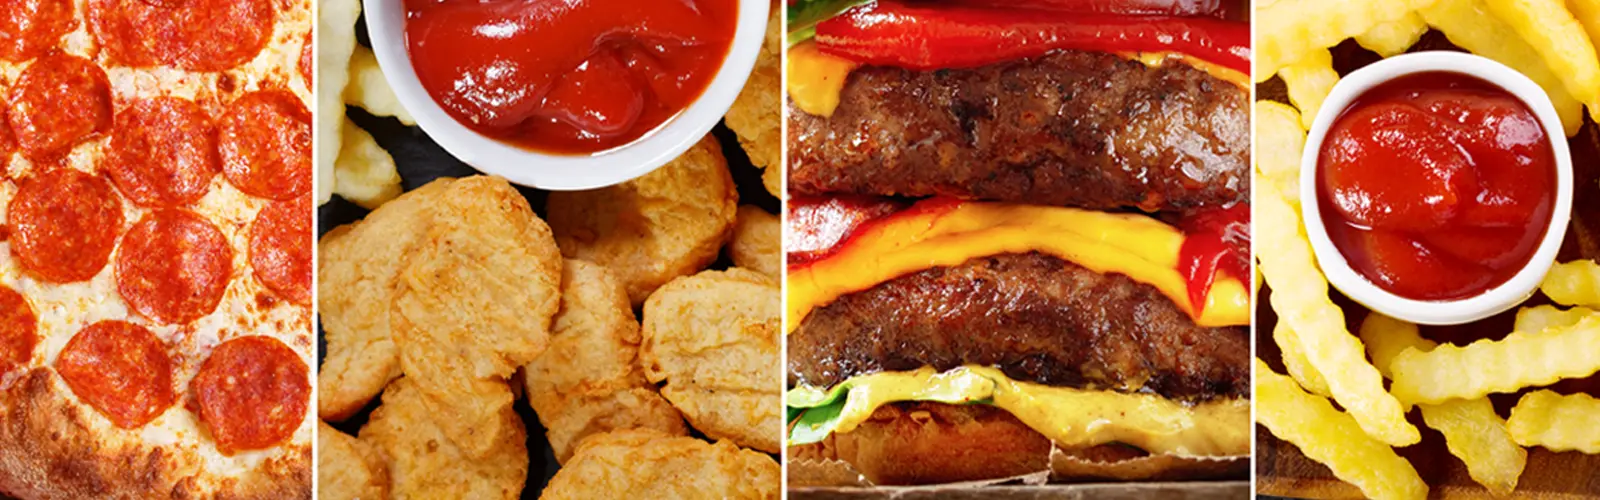 7 Tips for Kicking Your Fast-Food Cravings